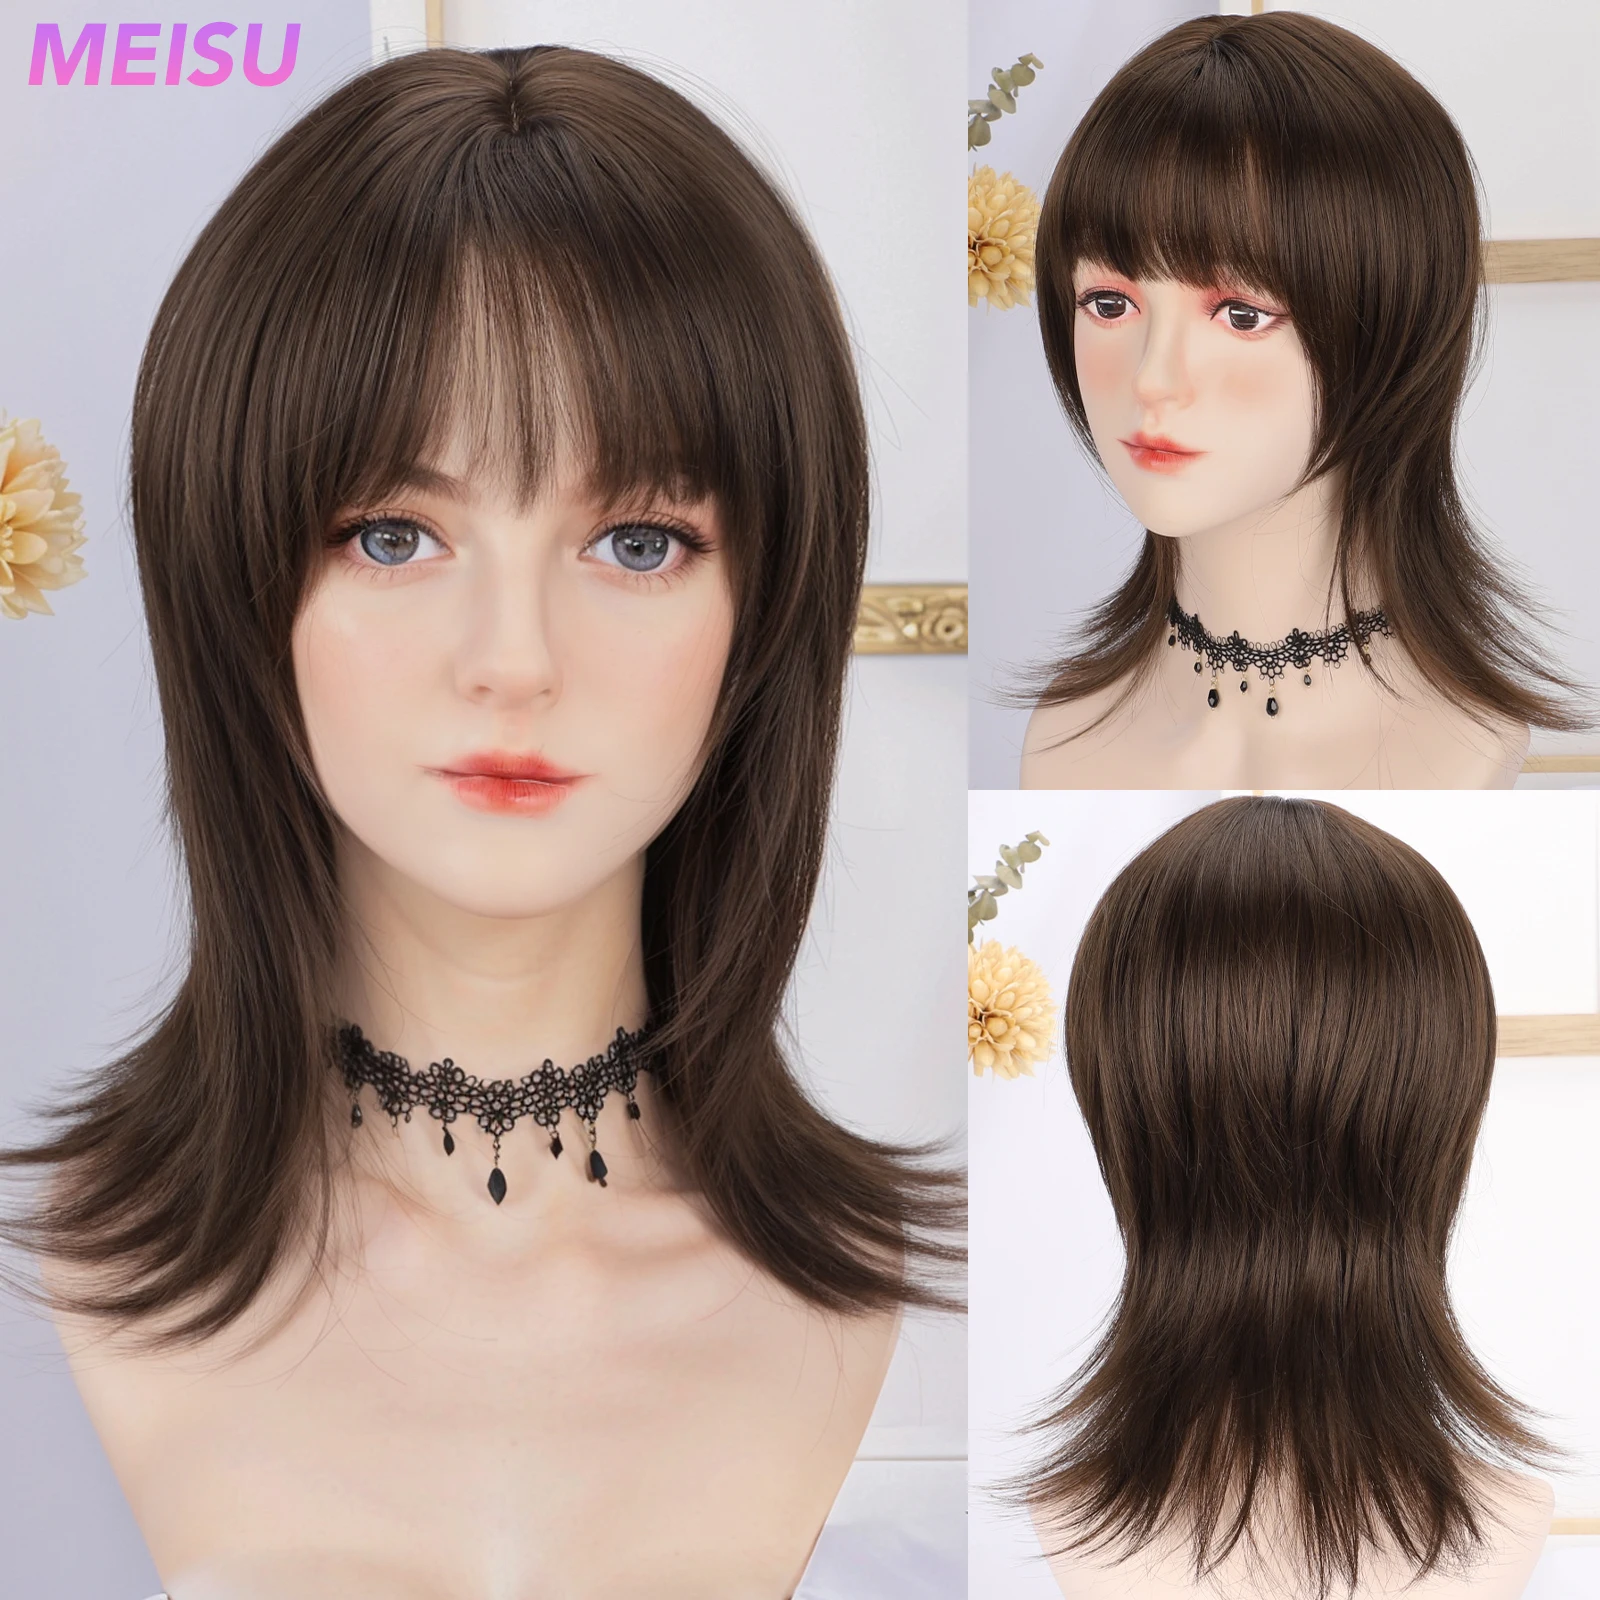 

MEISU 16 Inch Straight Bangs Wig Fiber Synthetic Wig Heat-resistant Non-Glare Natural Cosplay Hairpiece For Women Daily Use